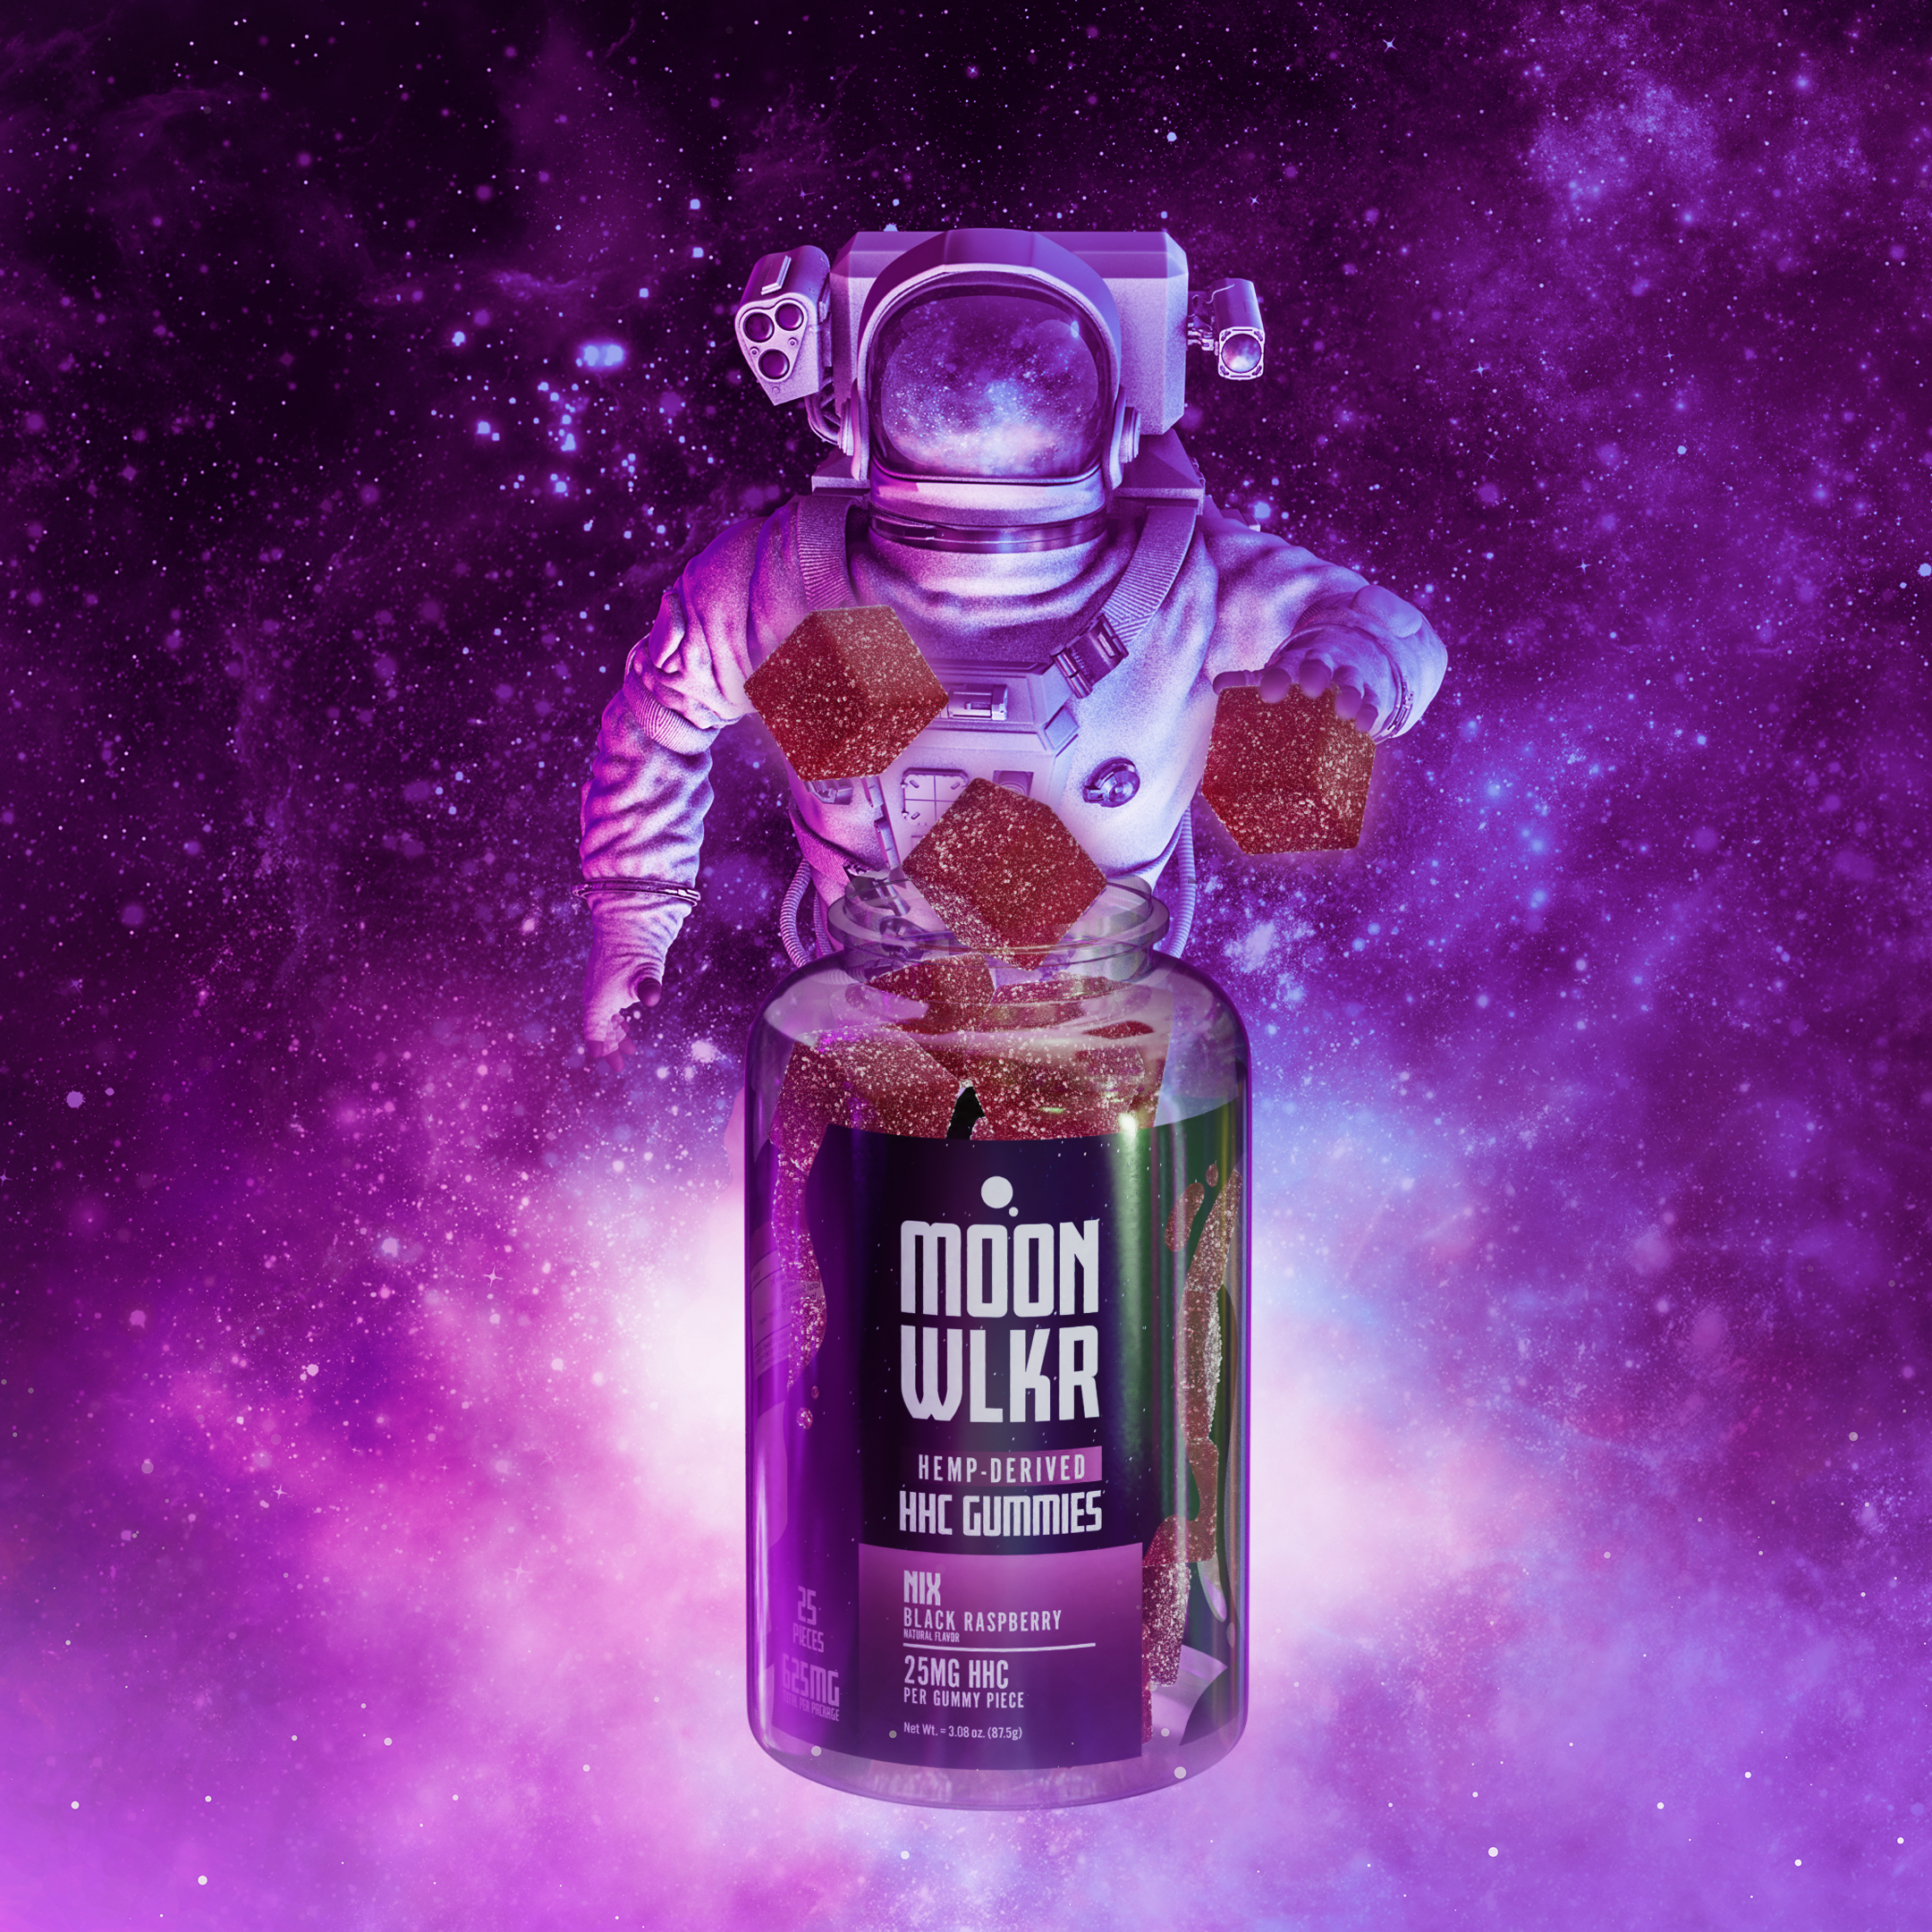 Bottle of HHC gummies bursting in front of an astronaut